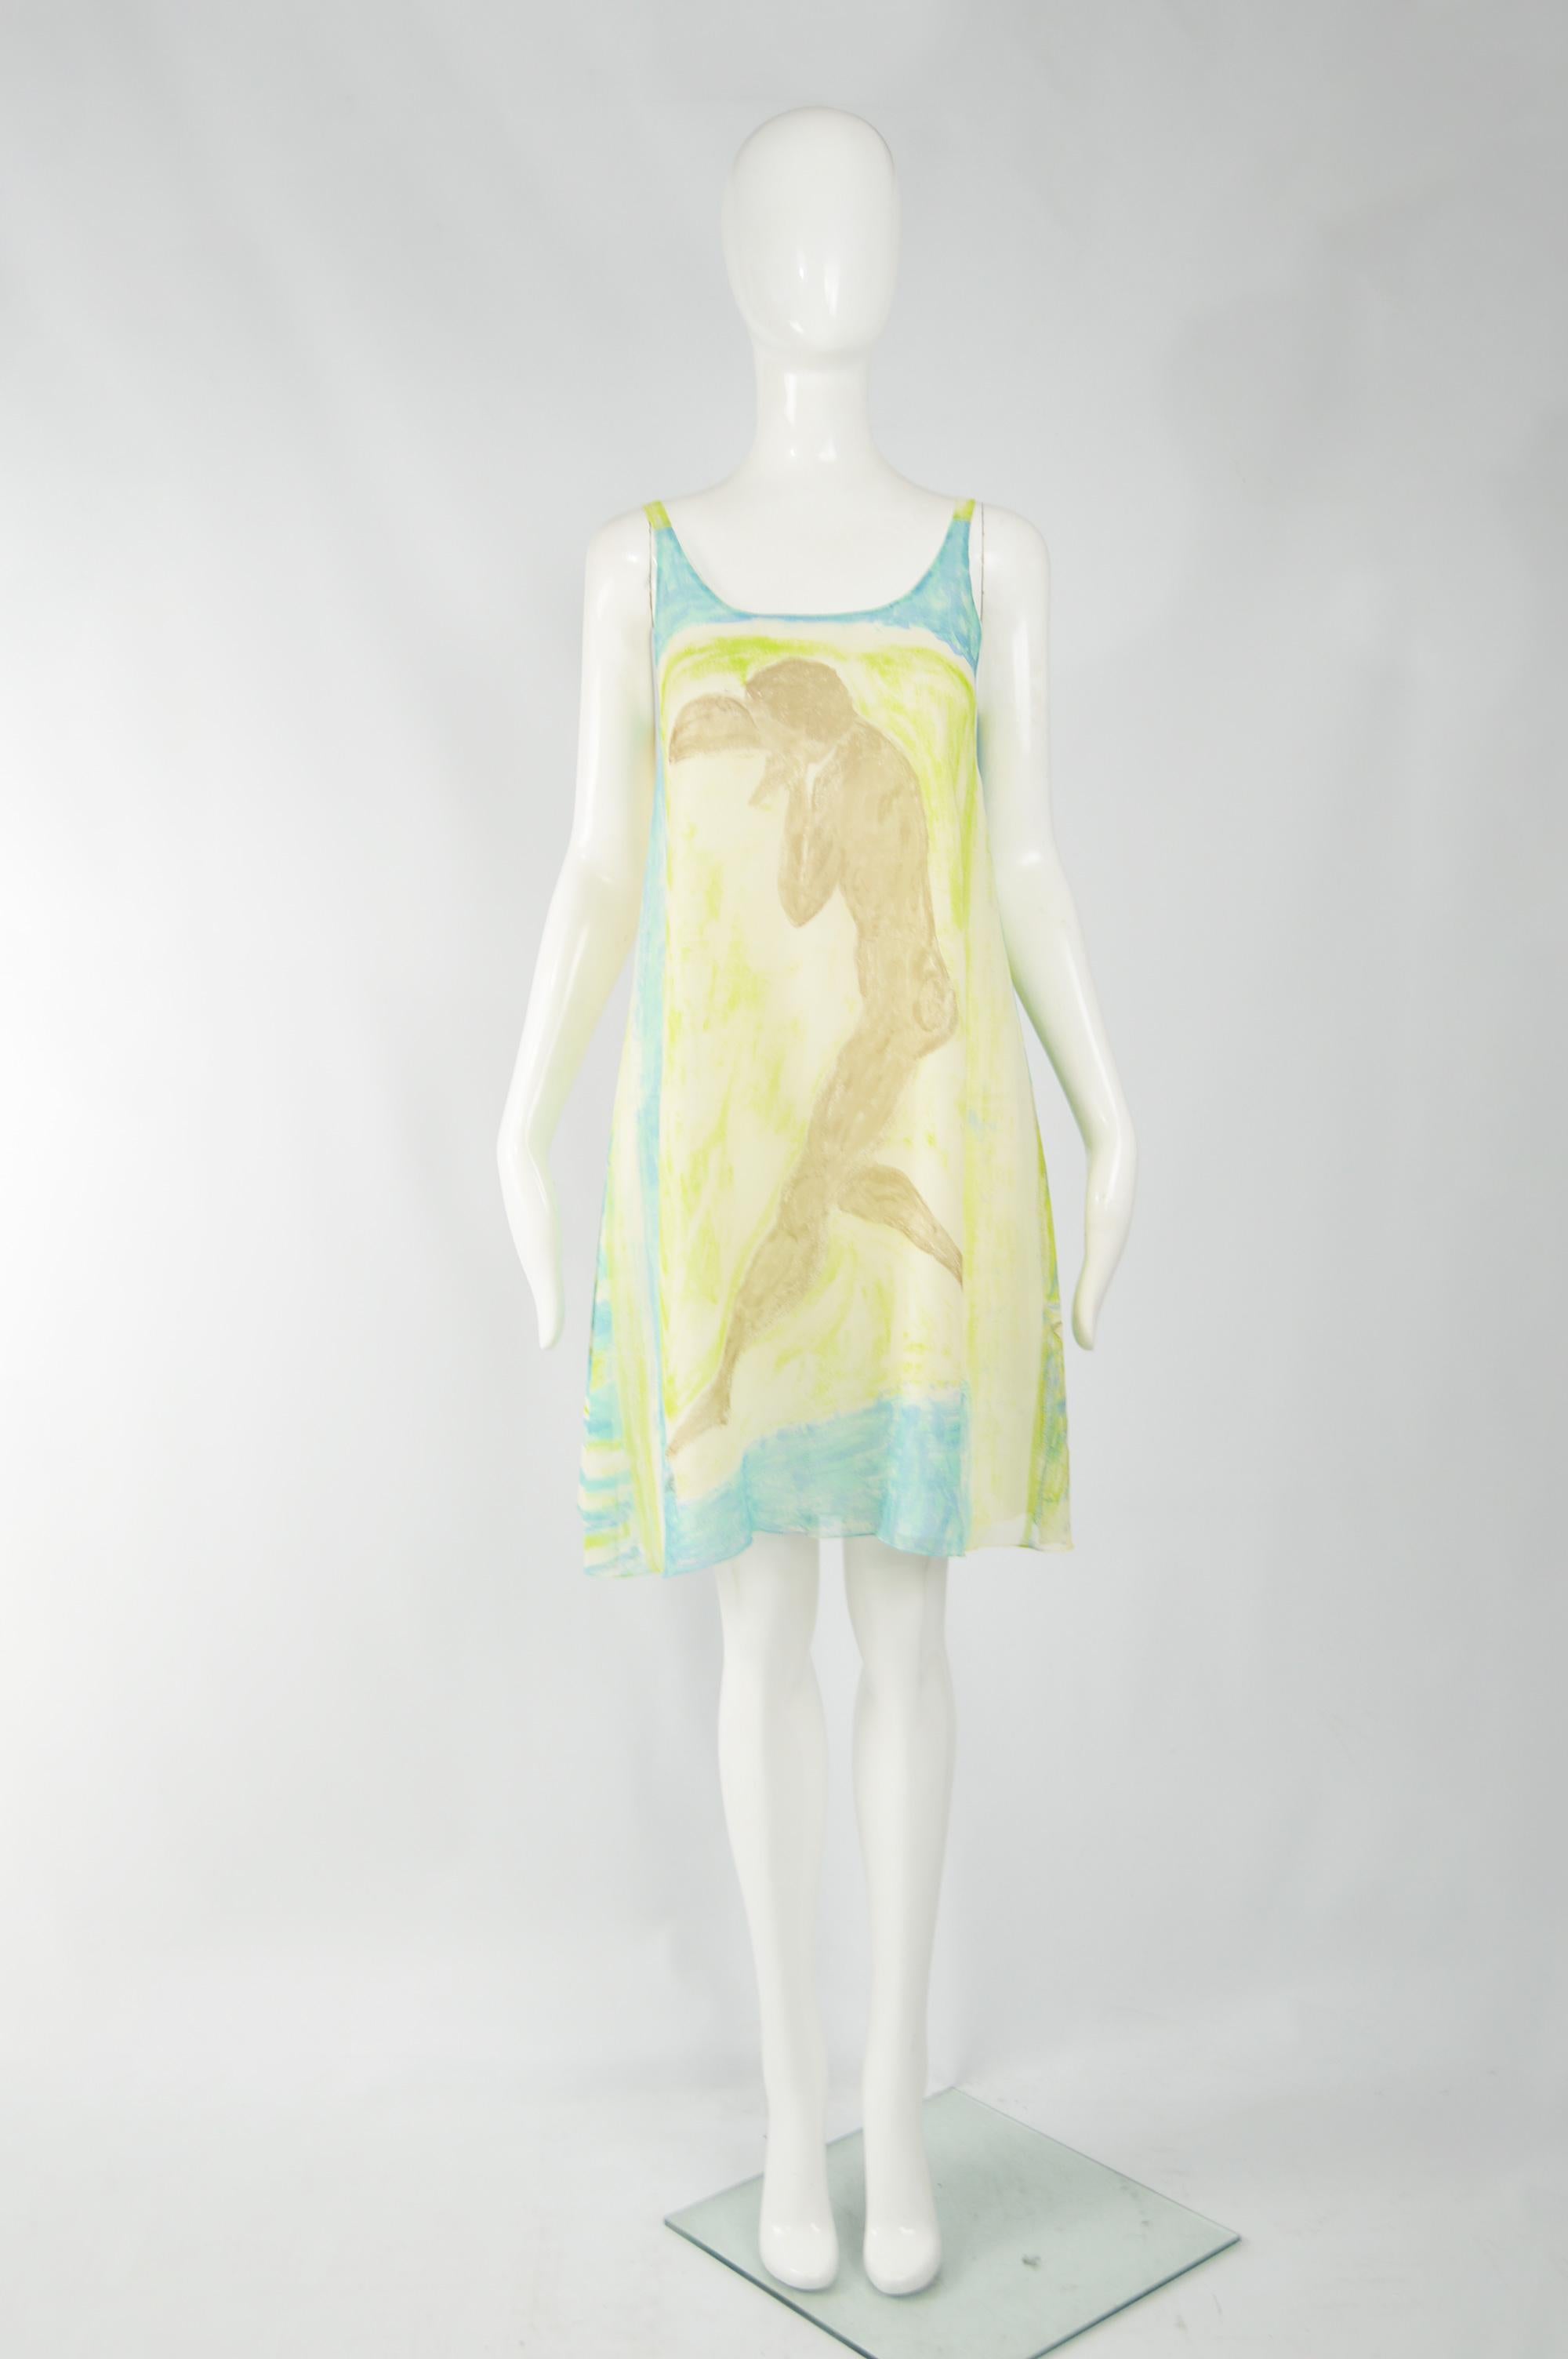 A stunning and rare vintage silk tent / shift dress from the 80s by iconic British fashion designer, Betty Jackson. In a cream silk with an abstract Matisse style print of a dancer on the front, with cute pockets to the rear.

Size: Marked UK 8